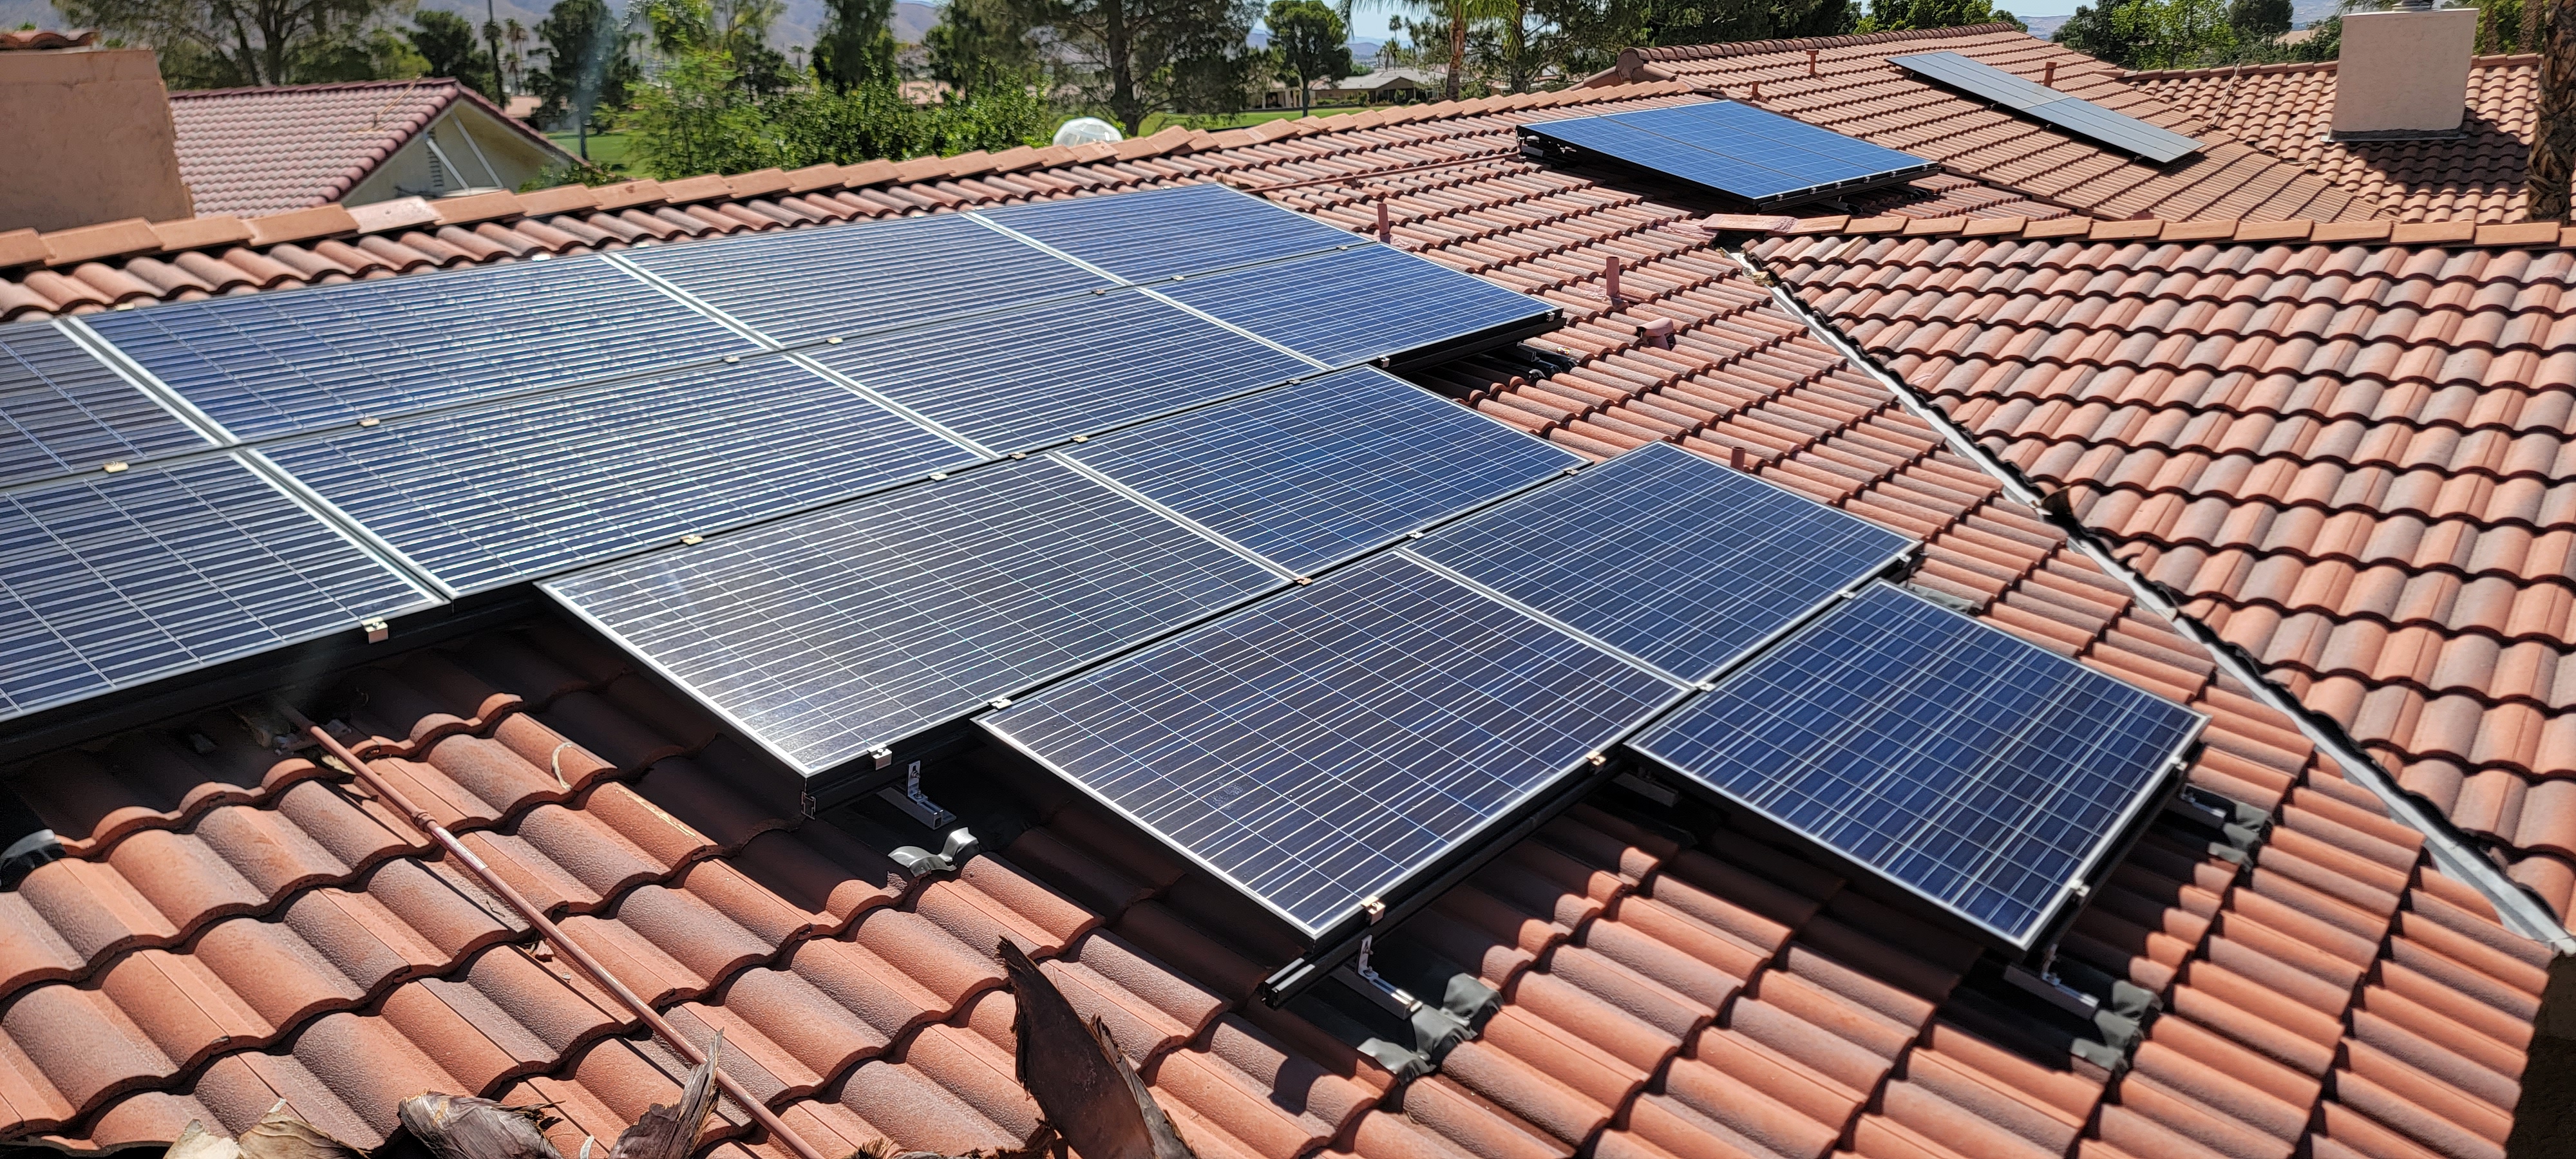 Top quality Solar panel cleaning in Desert Hot Springs, CA